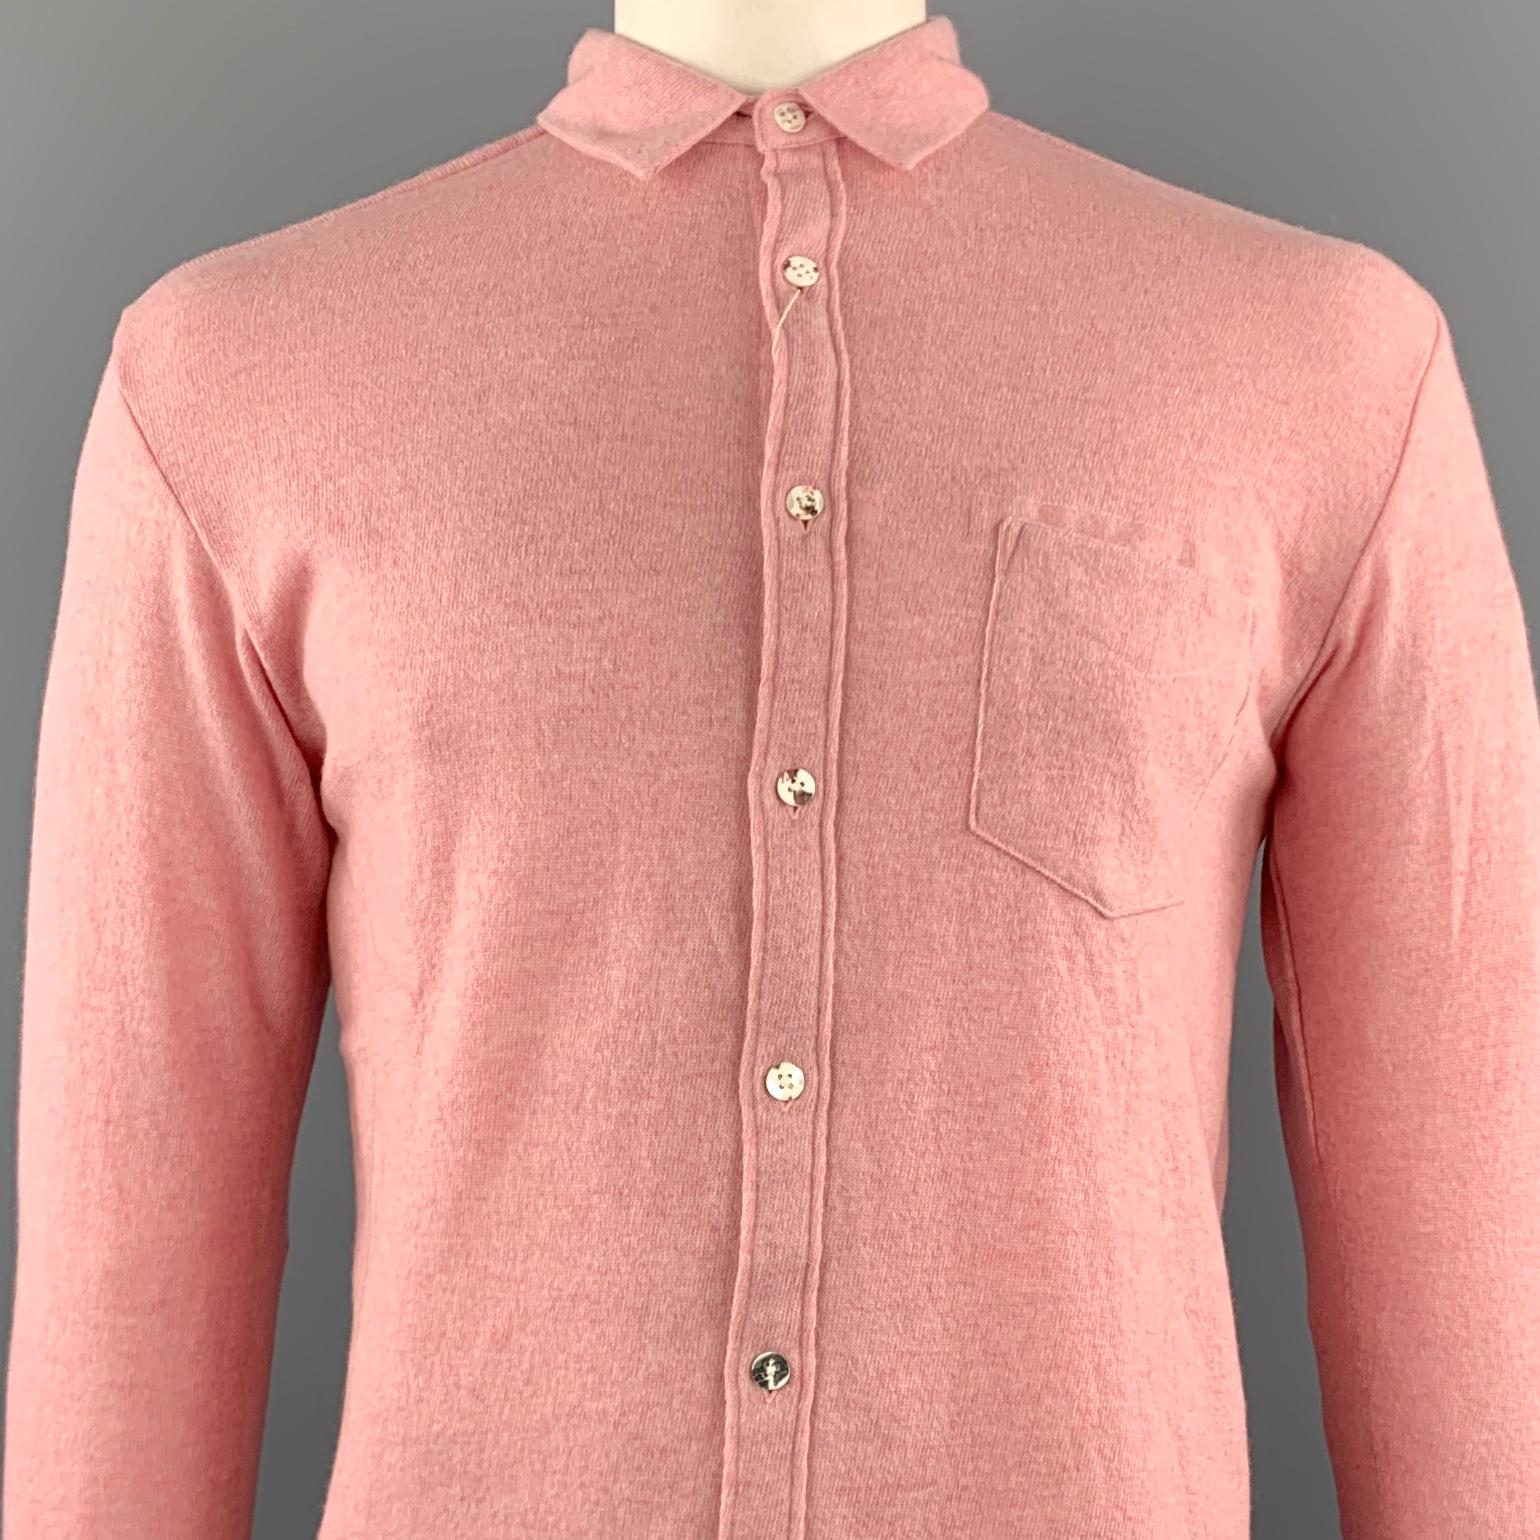 KAPITAL Long Sleeve Shirt comes in a rose pink knitted wool featuring a button up style, patch pocket, and a spread collar. Made in Japan.

New With Tags. 
Marked: 3
Original Retail Price: $406.00

Measurements:

Shoulder: 18 in. 
Chest: 44